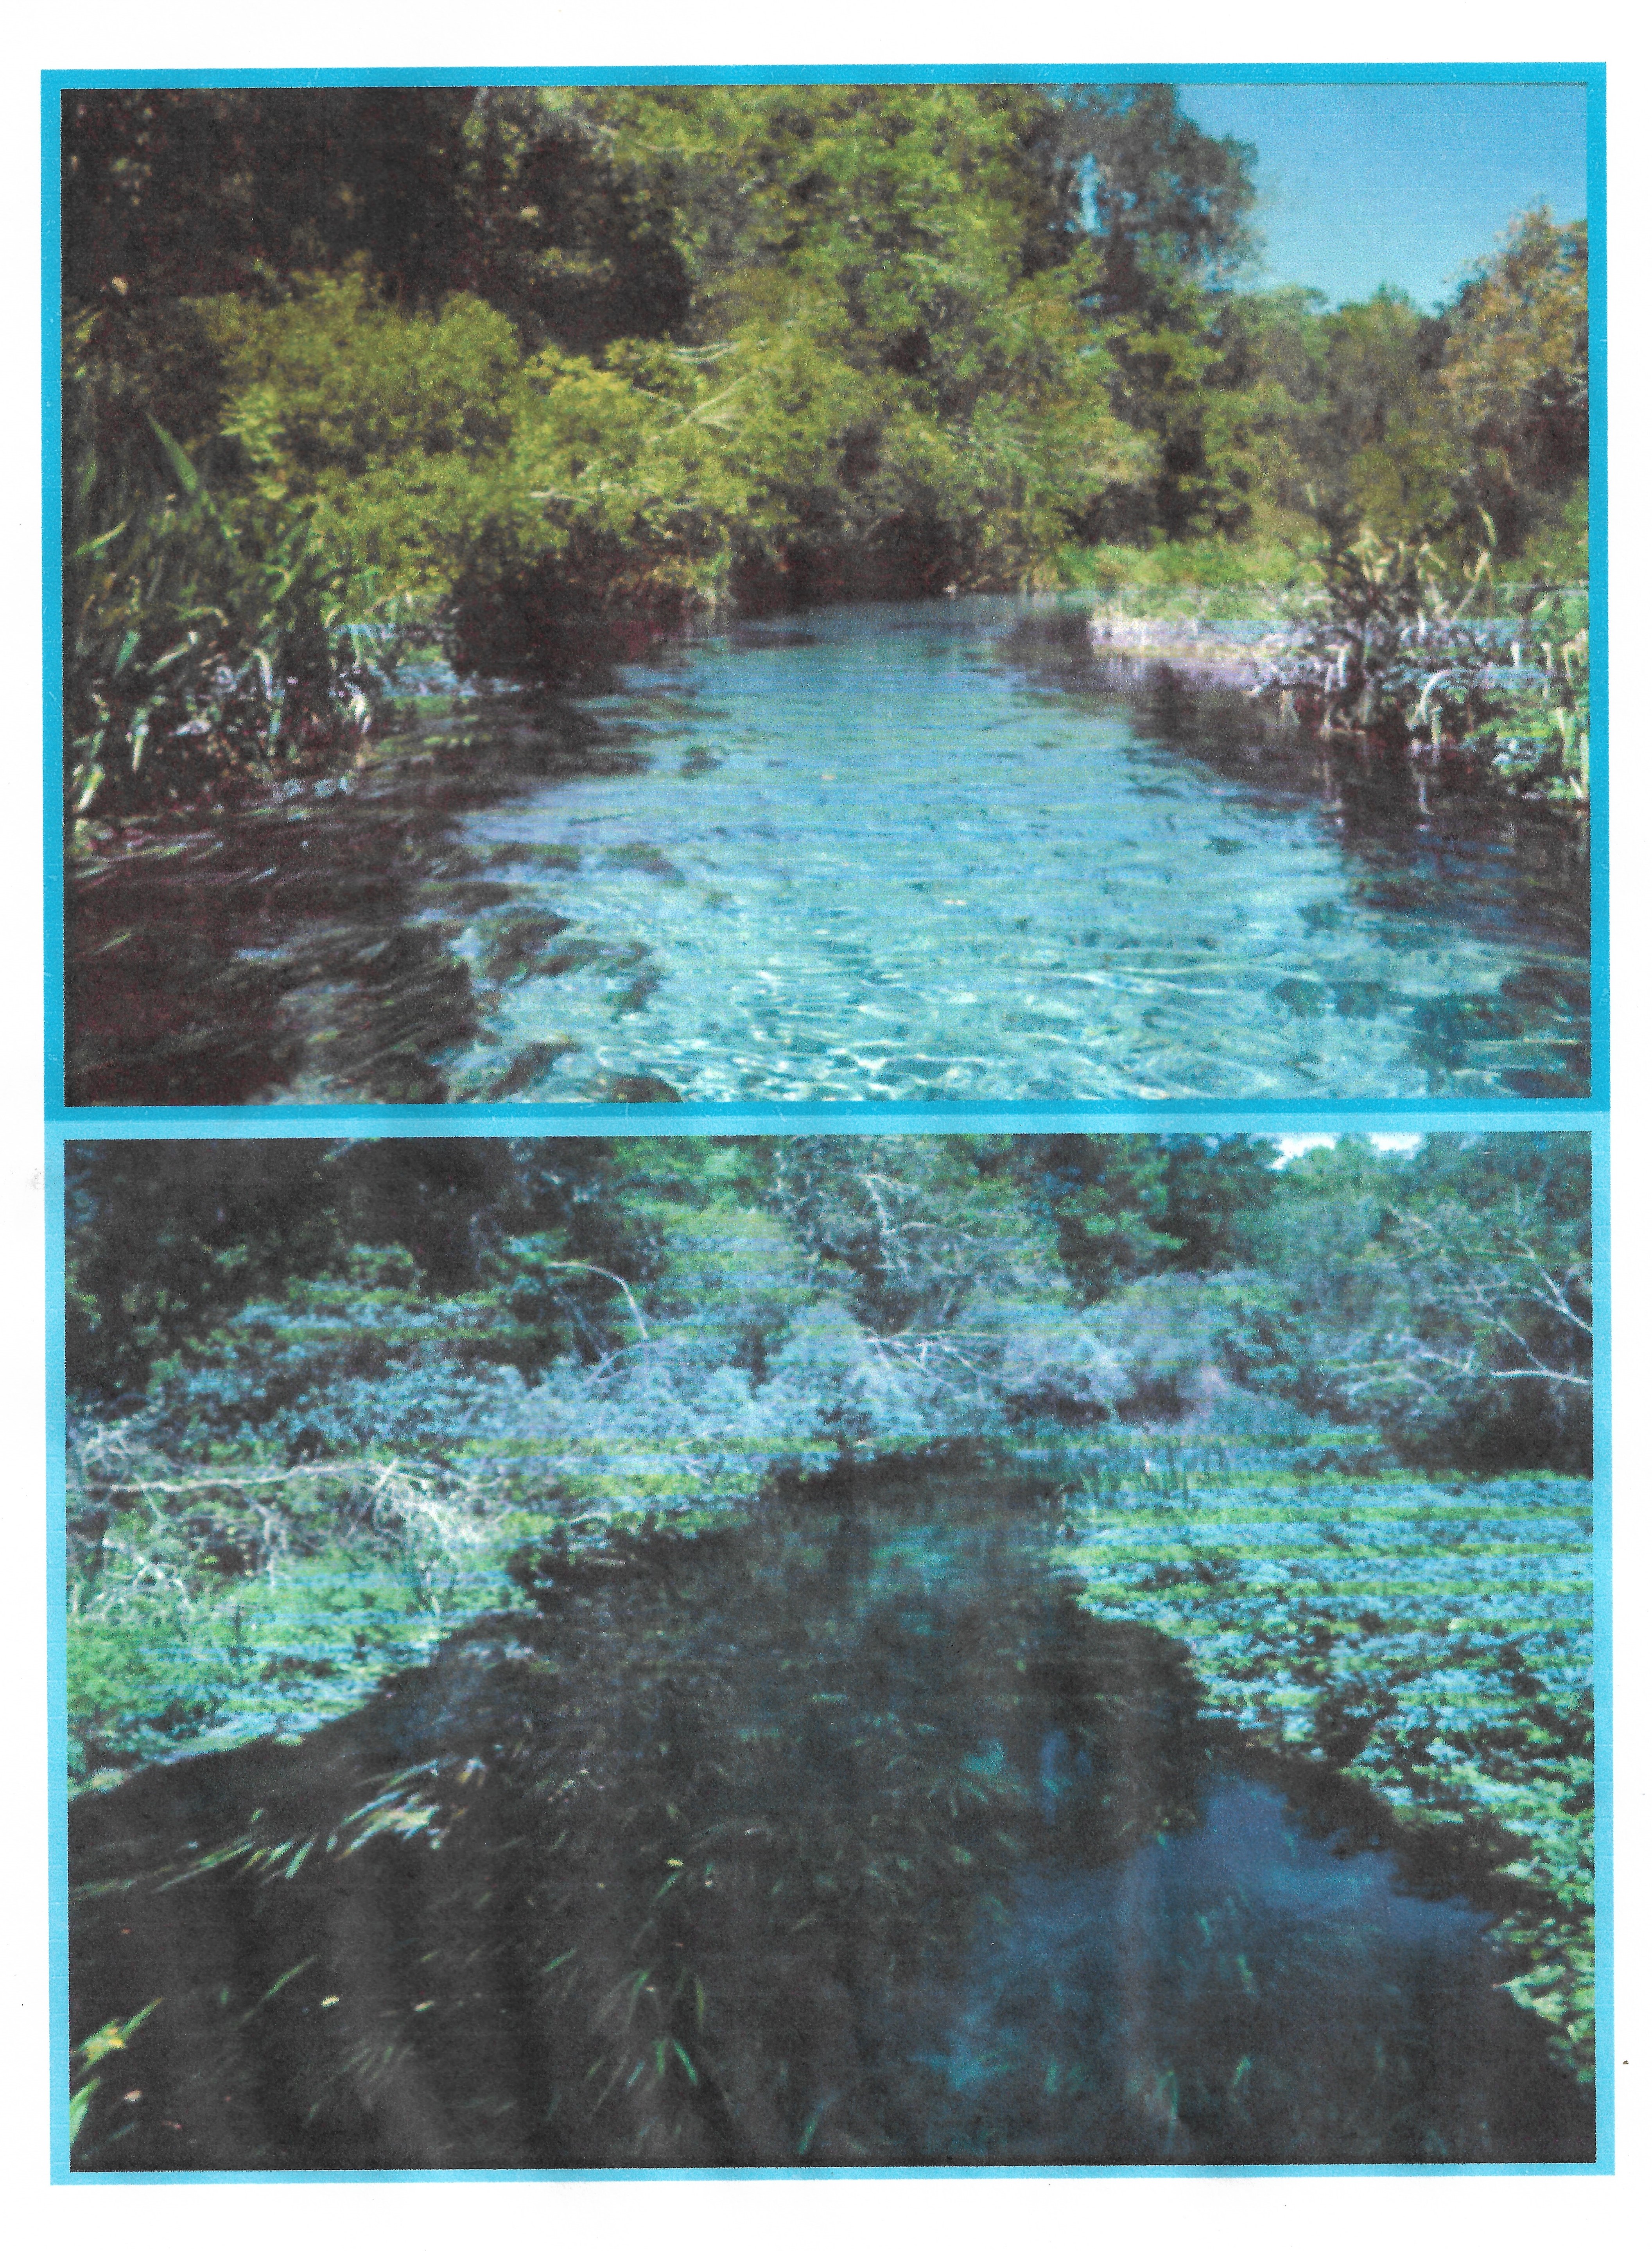 Two images of the Ichetucknee River showing river damage in the 1980s compared to the 1990s.